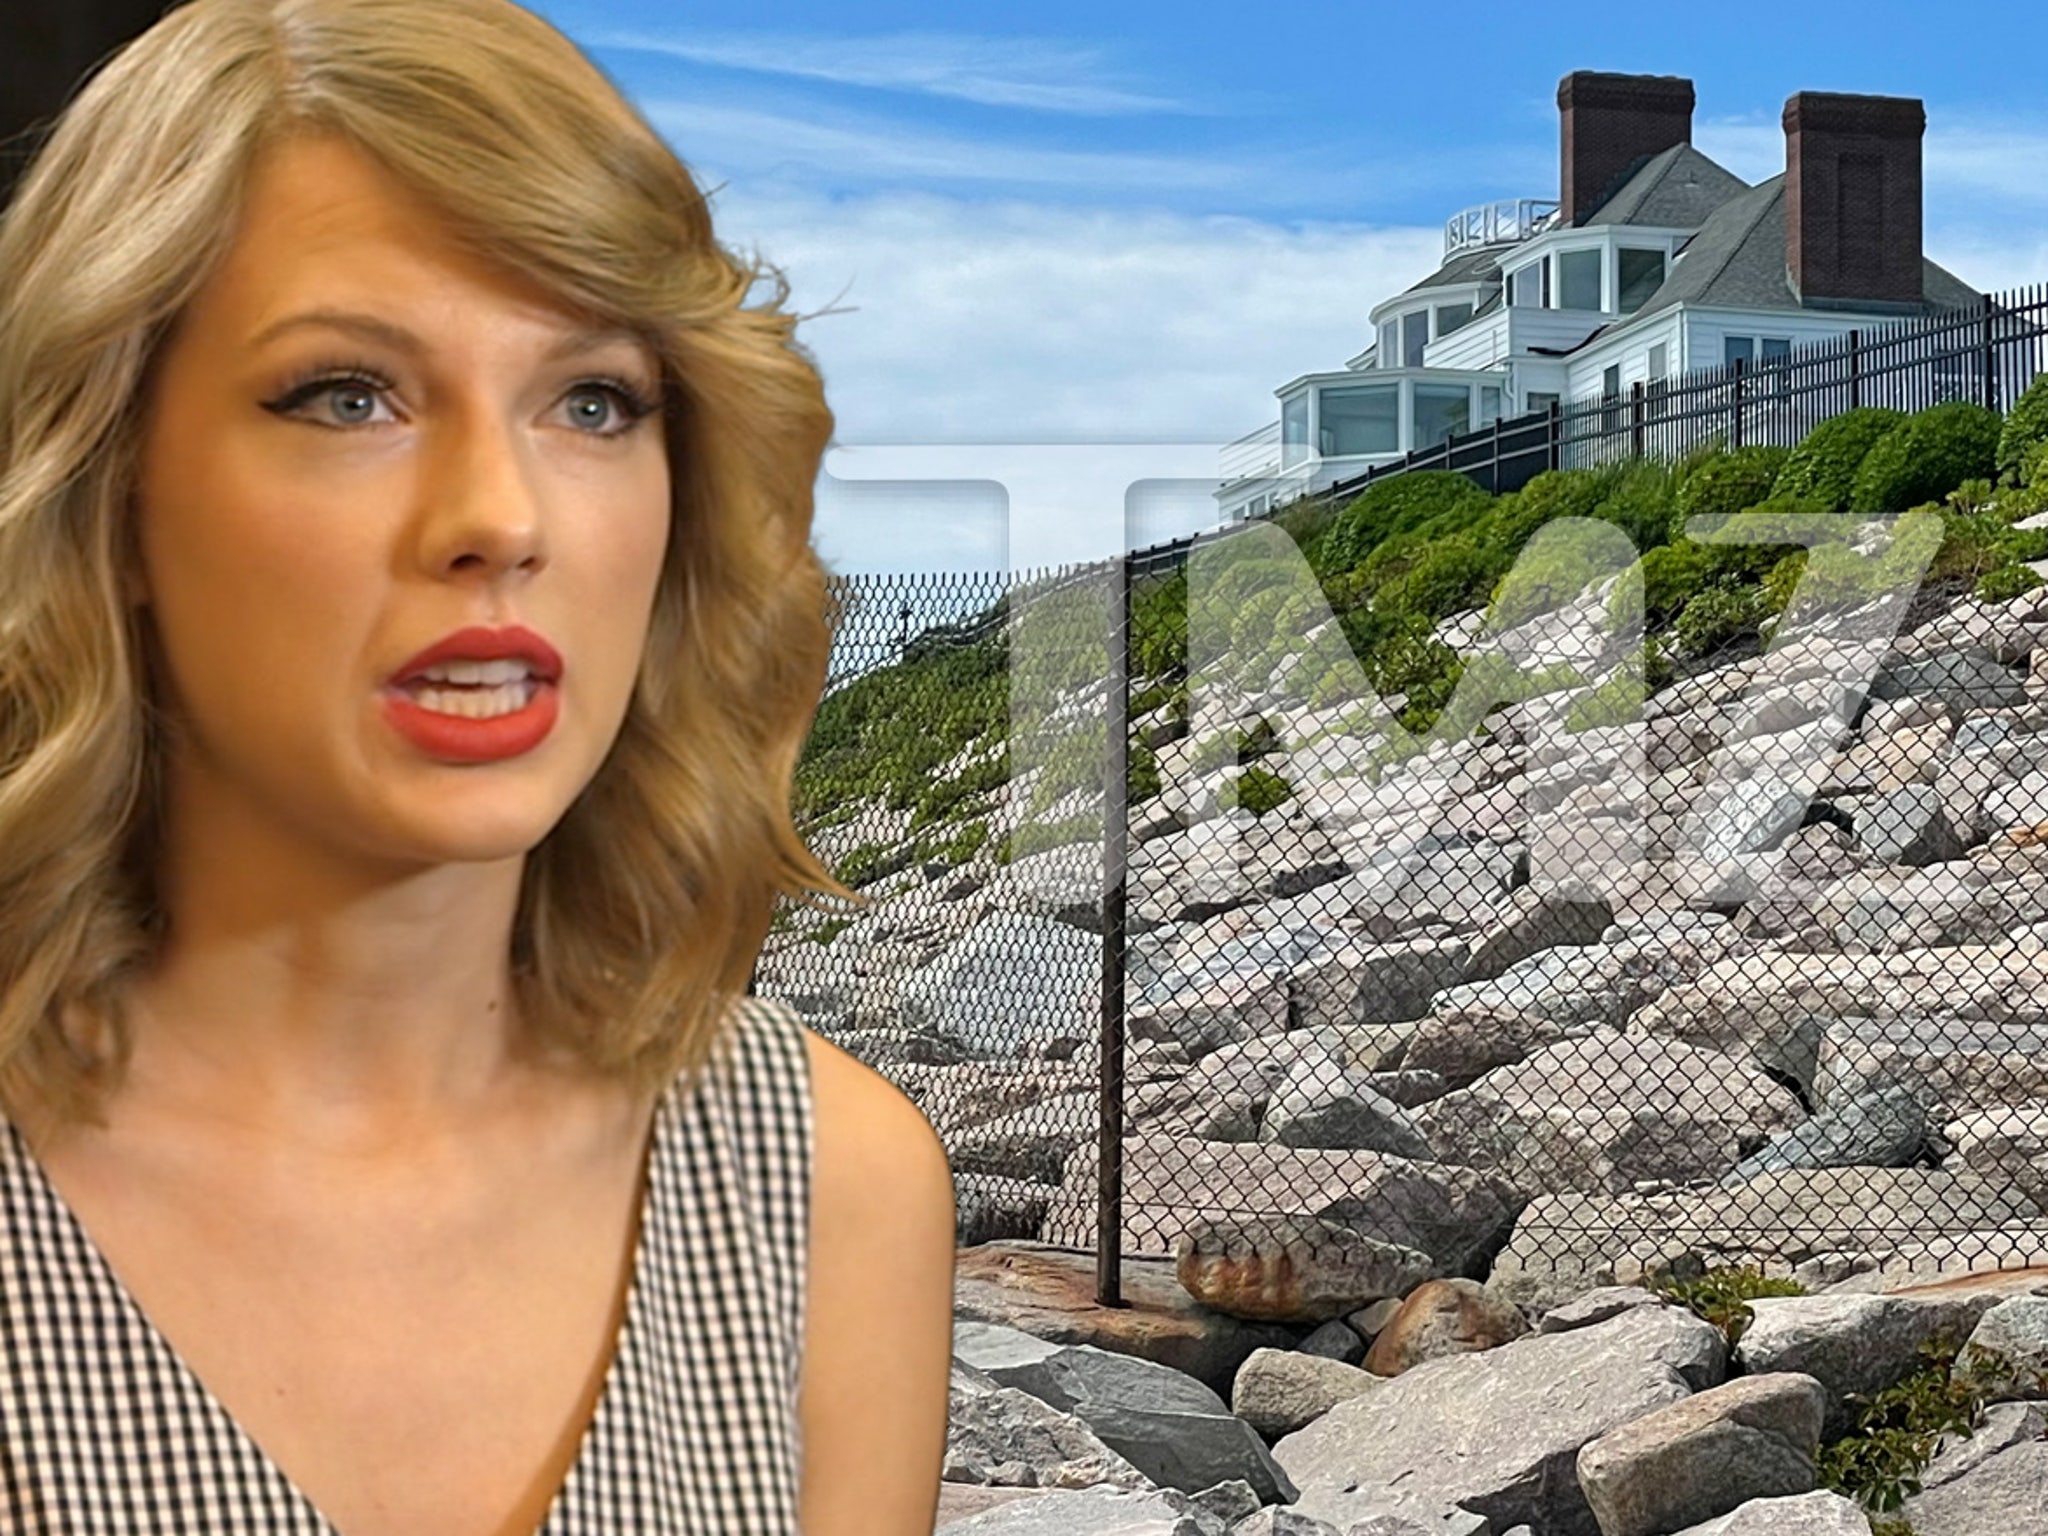 Man arrested outside Taylor Swift's NYC home again, charged with